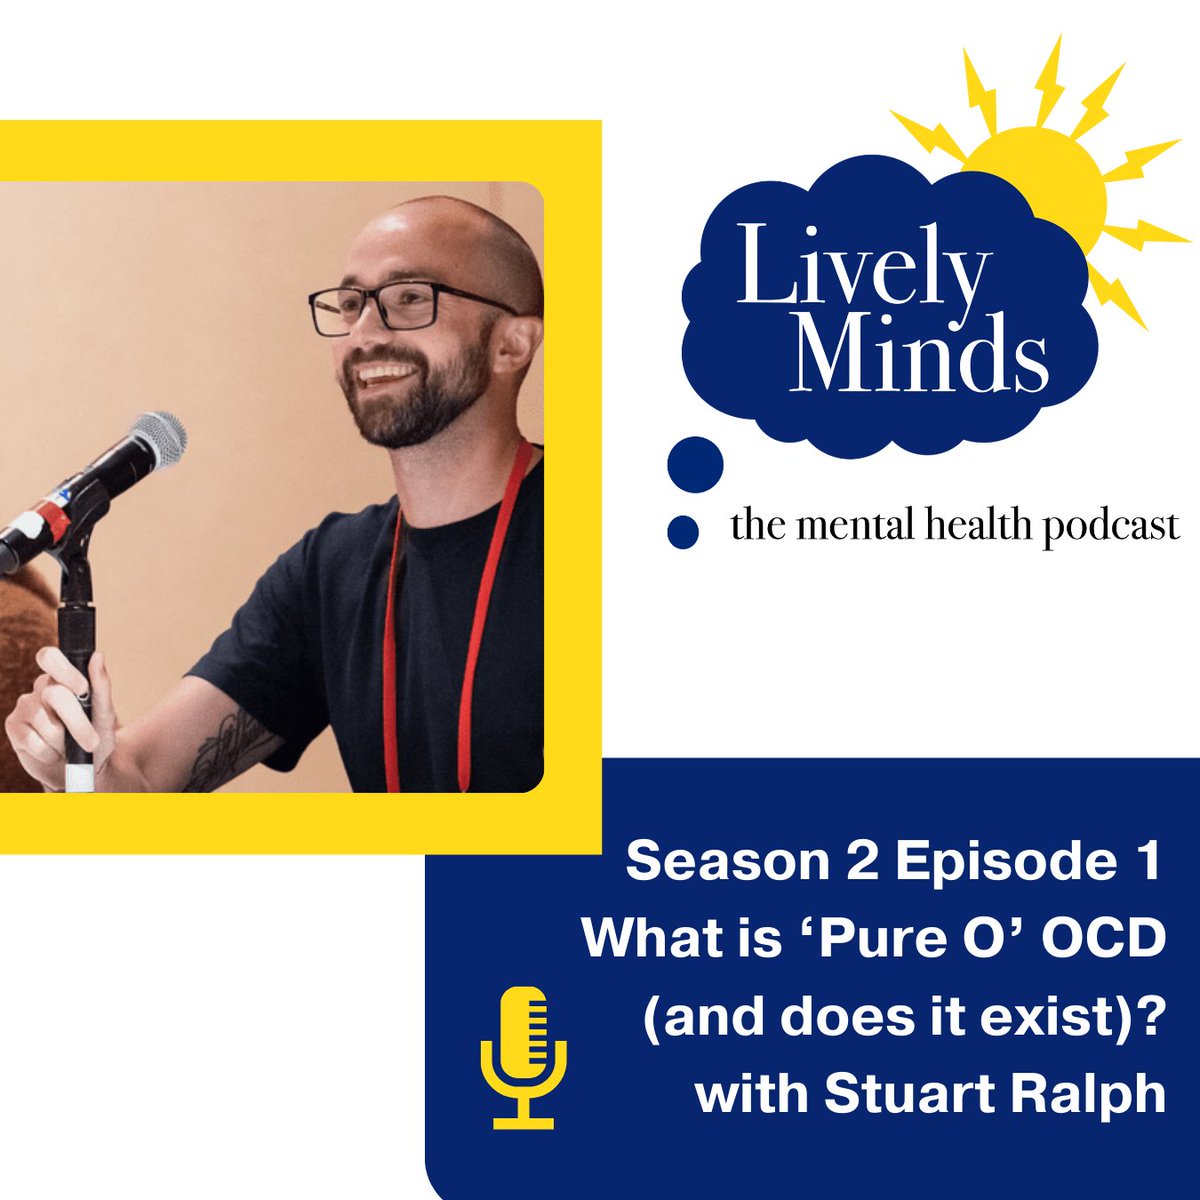 Series 2 is officially here! We're kicking off with our wonderful returning guest Stuart Ralph from @TheOCDStories podcast in Episode 1: What is 'Pure O' (and does it exist)? subscribe NOW wherever you get your podcasts anyamedia.net/project/lively… #PureO #OCD #MentalHealthPodcast